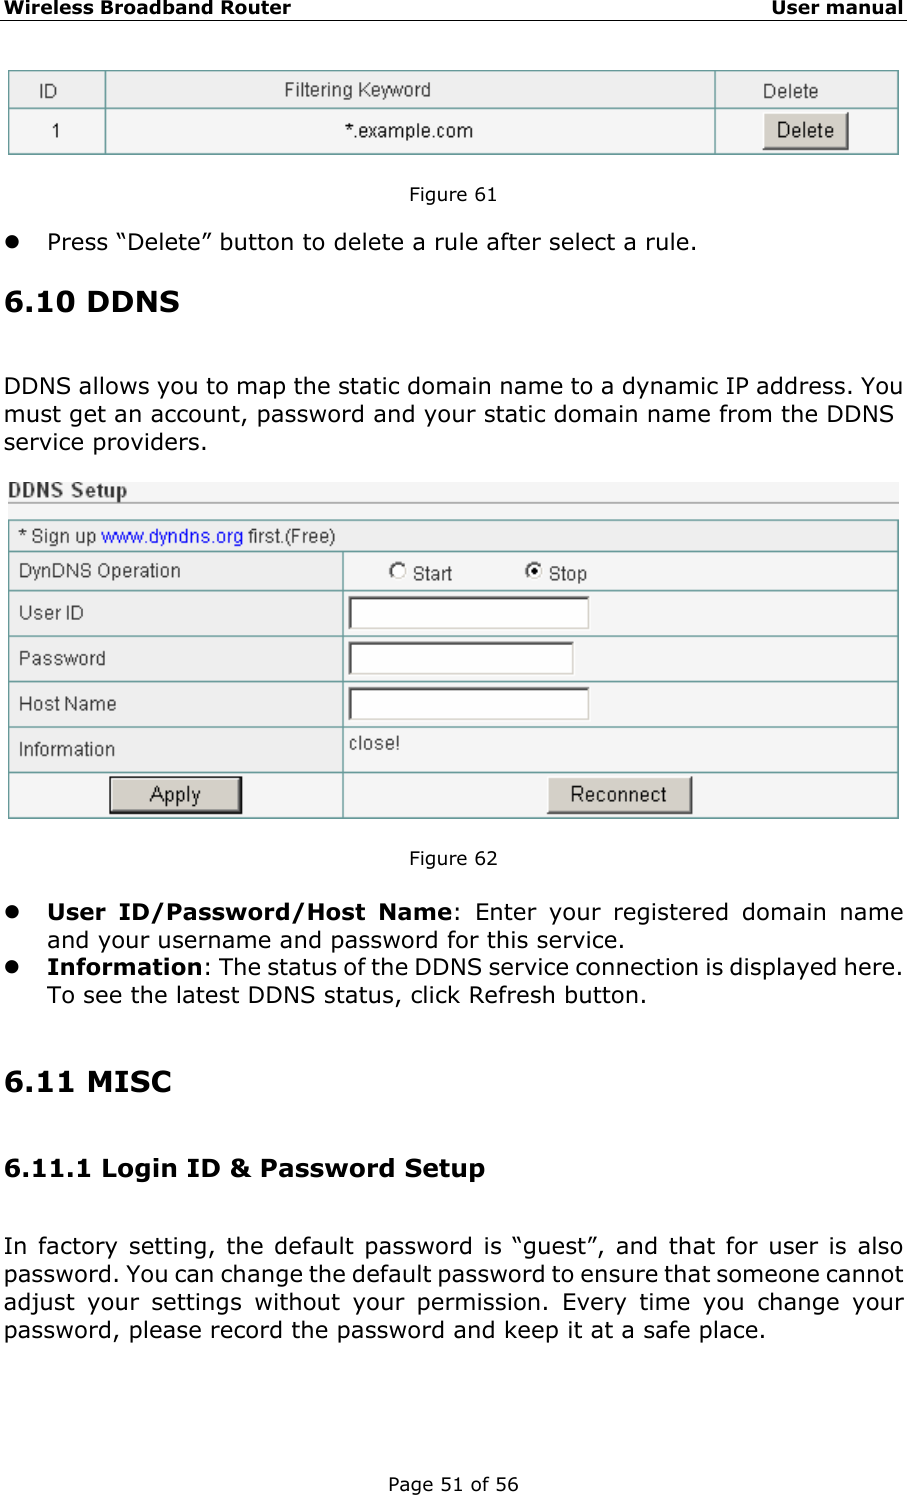 Wireless Broadband Router                                                   User manual Page 51 of 56   Figure 61  z Press “Delete” button to delete a rule after select a rule. 6.10 DDNS DDNS allows you to map the static domain name to a dynamic IP address. You must get an account, password and your static domain name from the DDNS service providers.      Figure 62  z User ID/Password/Host Name: Enter your registered domain name and your username and password for this service. z Information: The status of the DDNS service connection is displayed here. To see the latest DDNS status, click Refresh button.  6.11 MISC 6.11.1 Login ID &amp; Password Setup In factory setting, the default password is “guest”, and that for user is also password. You can change the default password to ensure that someone cannot adjust your settings without your permission. Every time you change your password, please record the password and keep it at a safe place.   